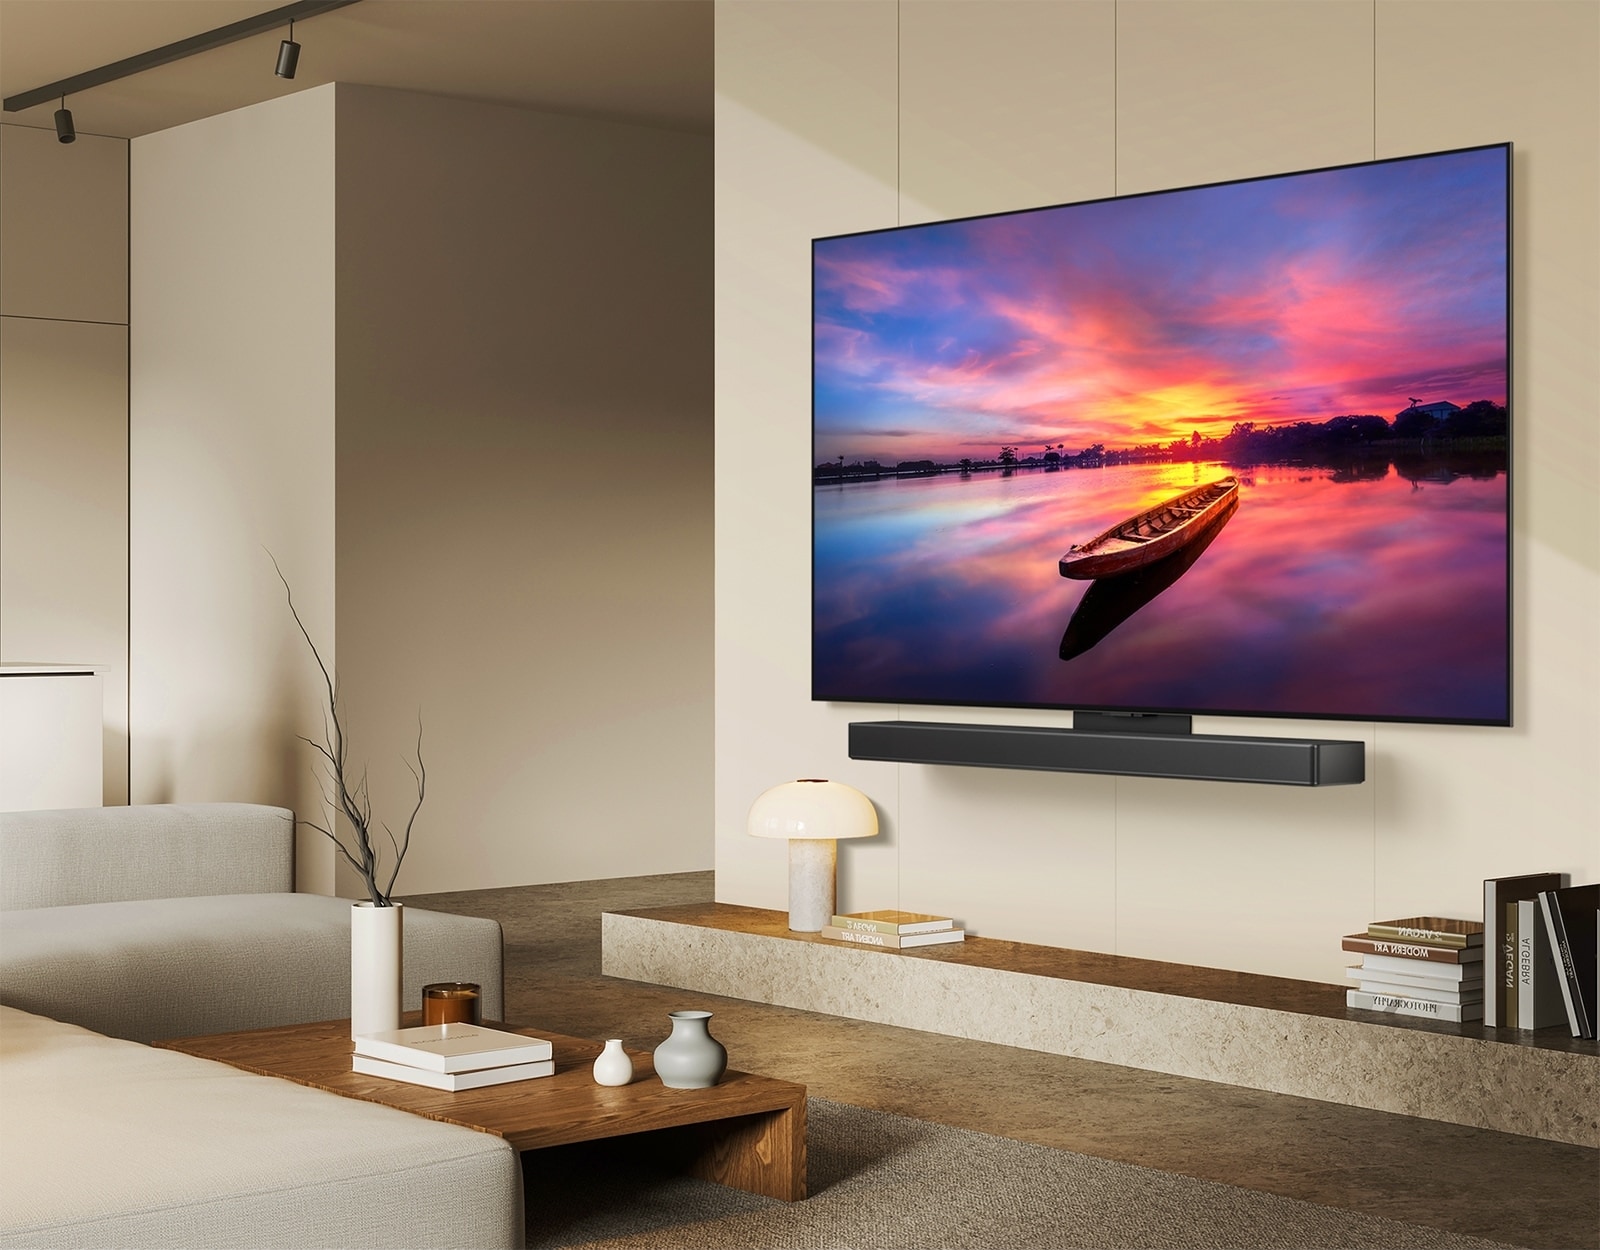 LG OLED TV, OLED C4 facing 45 degrees to the left displaying a beautiful sunset with a boat on a lake, as TV is attached to an LG Soundbar via the Synergy bracket in a minimalist living space.